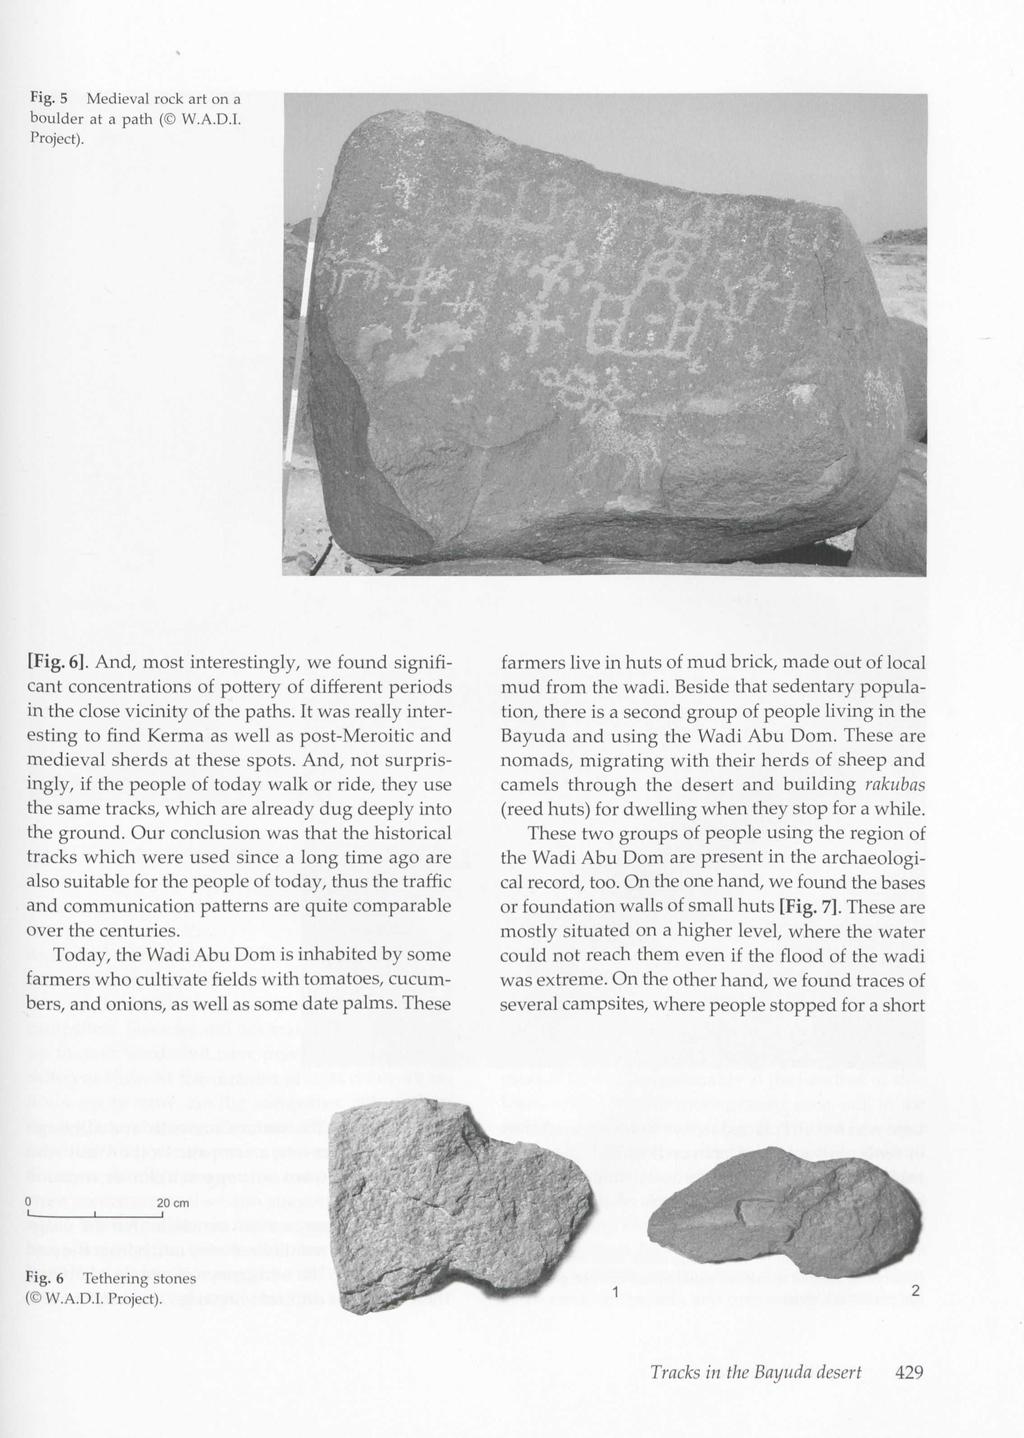 [Fig. 6]. And, most interestingly, we found significant concentrations of pottery of different periods in the close vicinity of the paths.